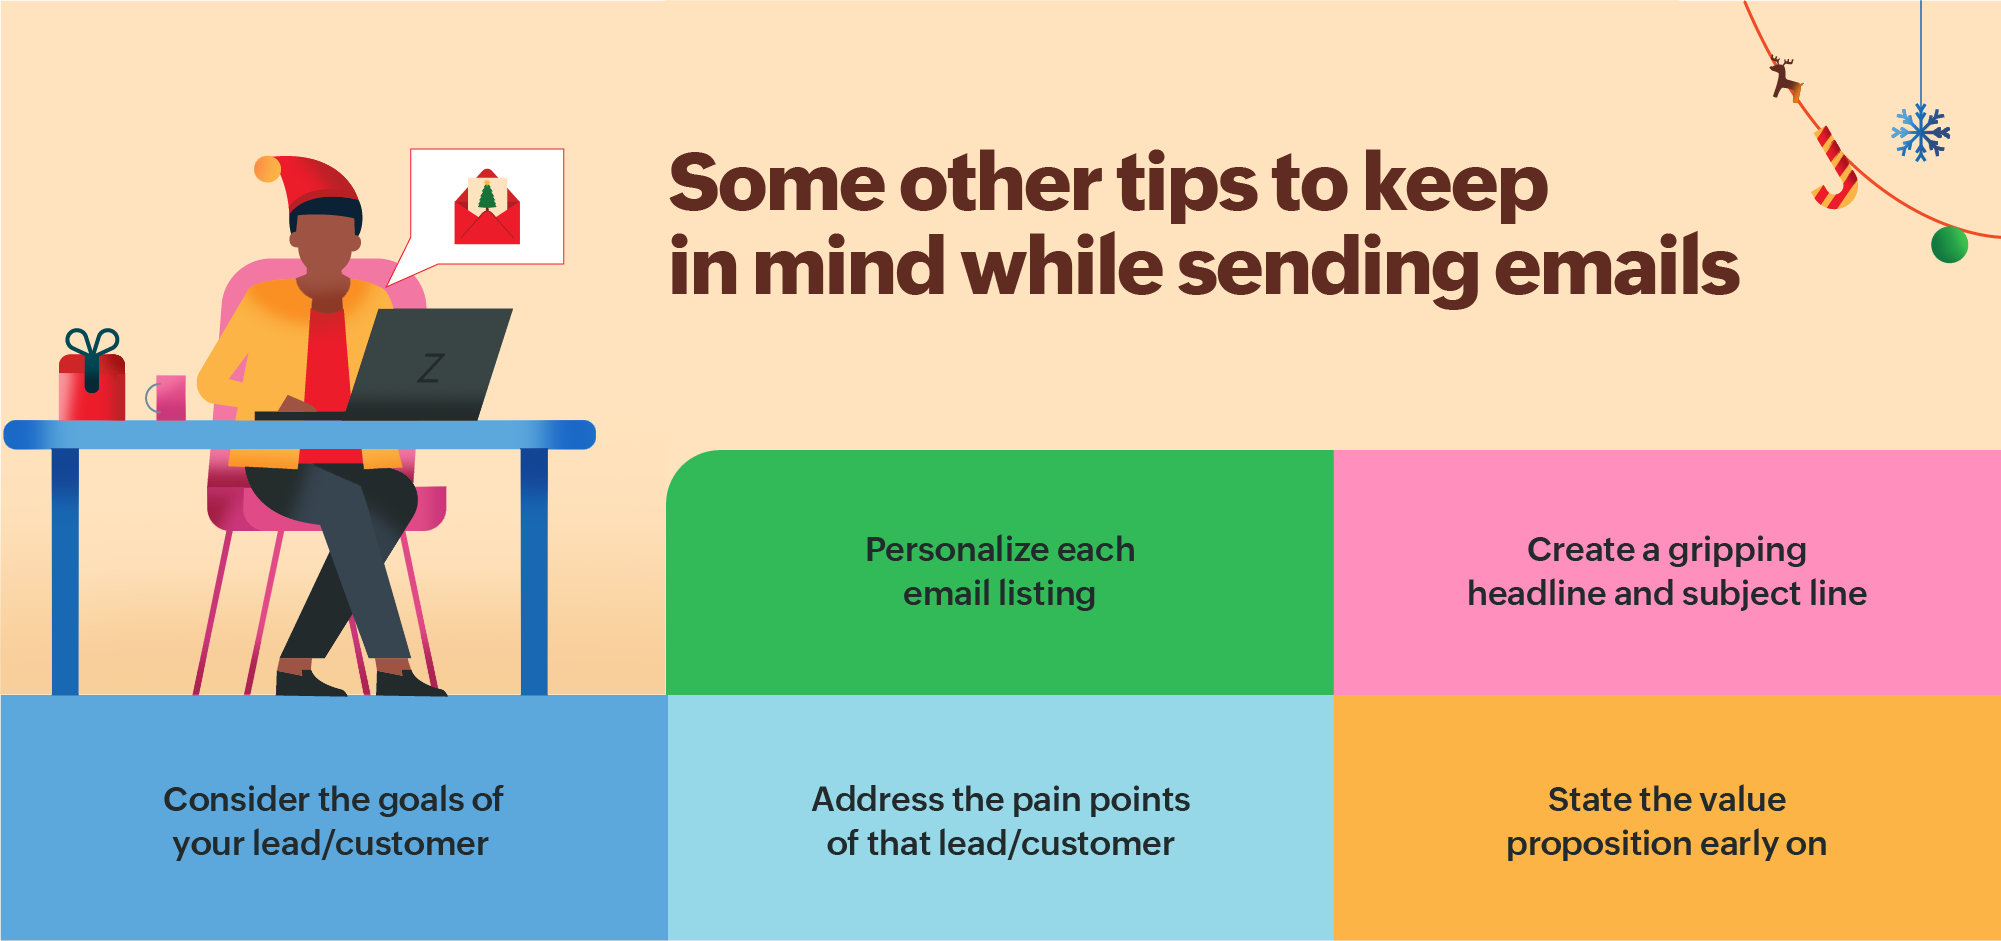 A person sending holiday mails to leads. Best tips to send effective emails.